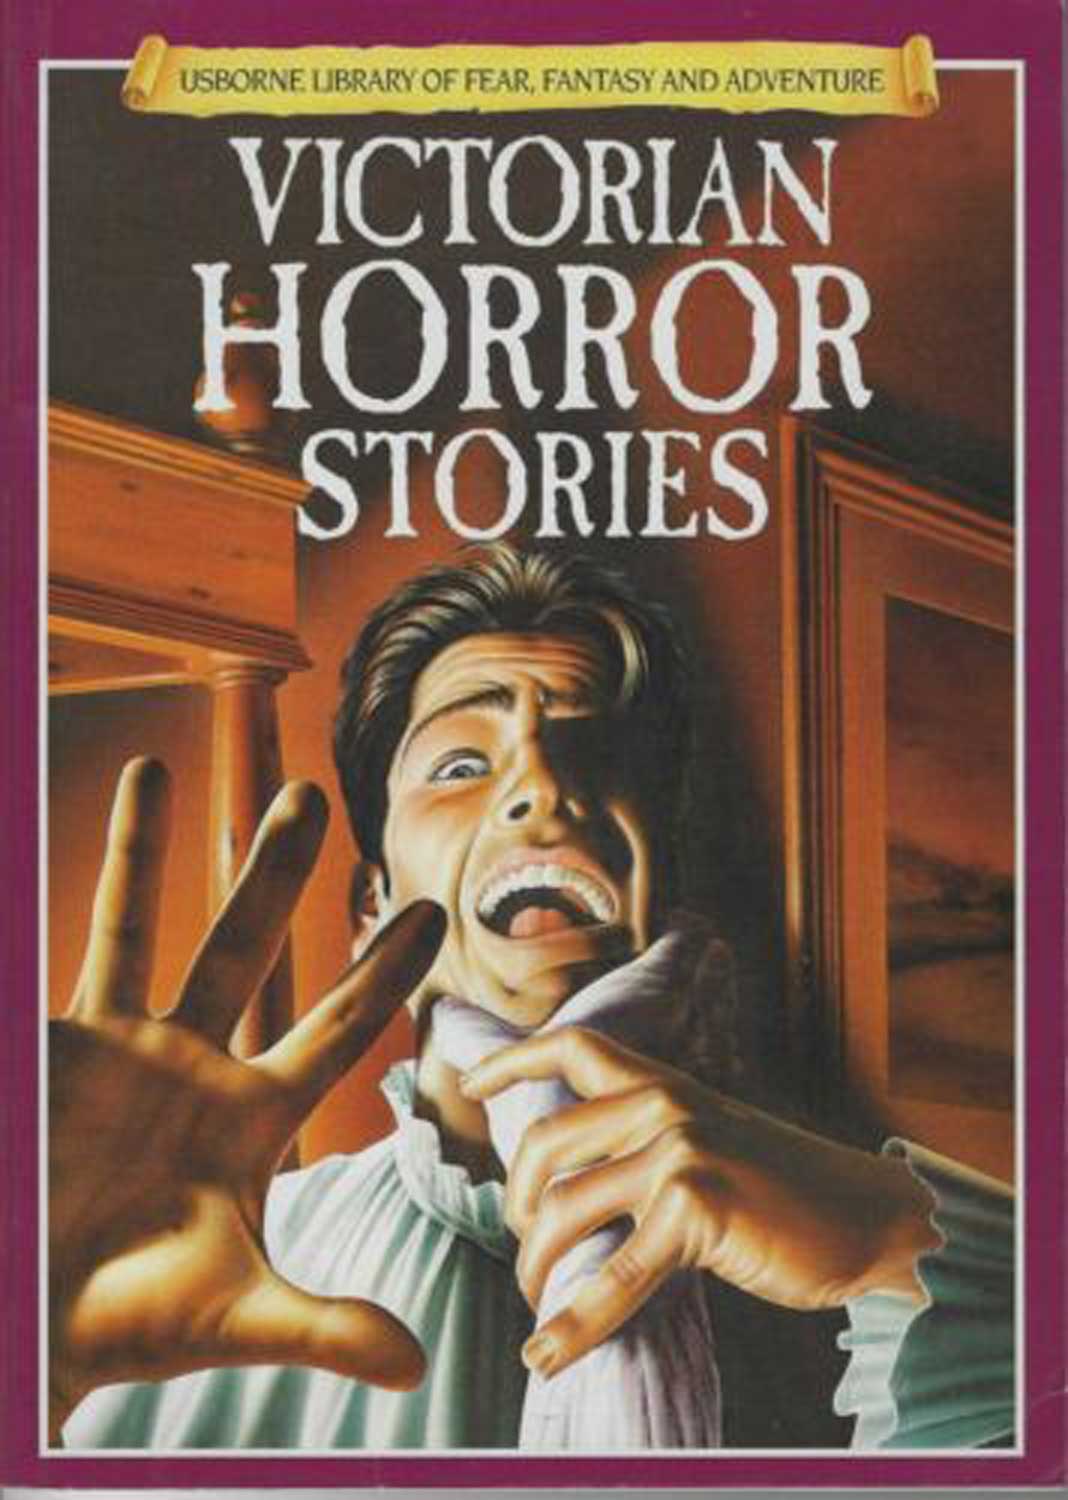 Victorian Horror Stories by Mike Stocks (Paperback, 1997)